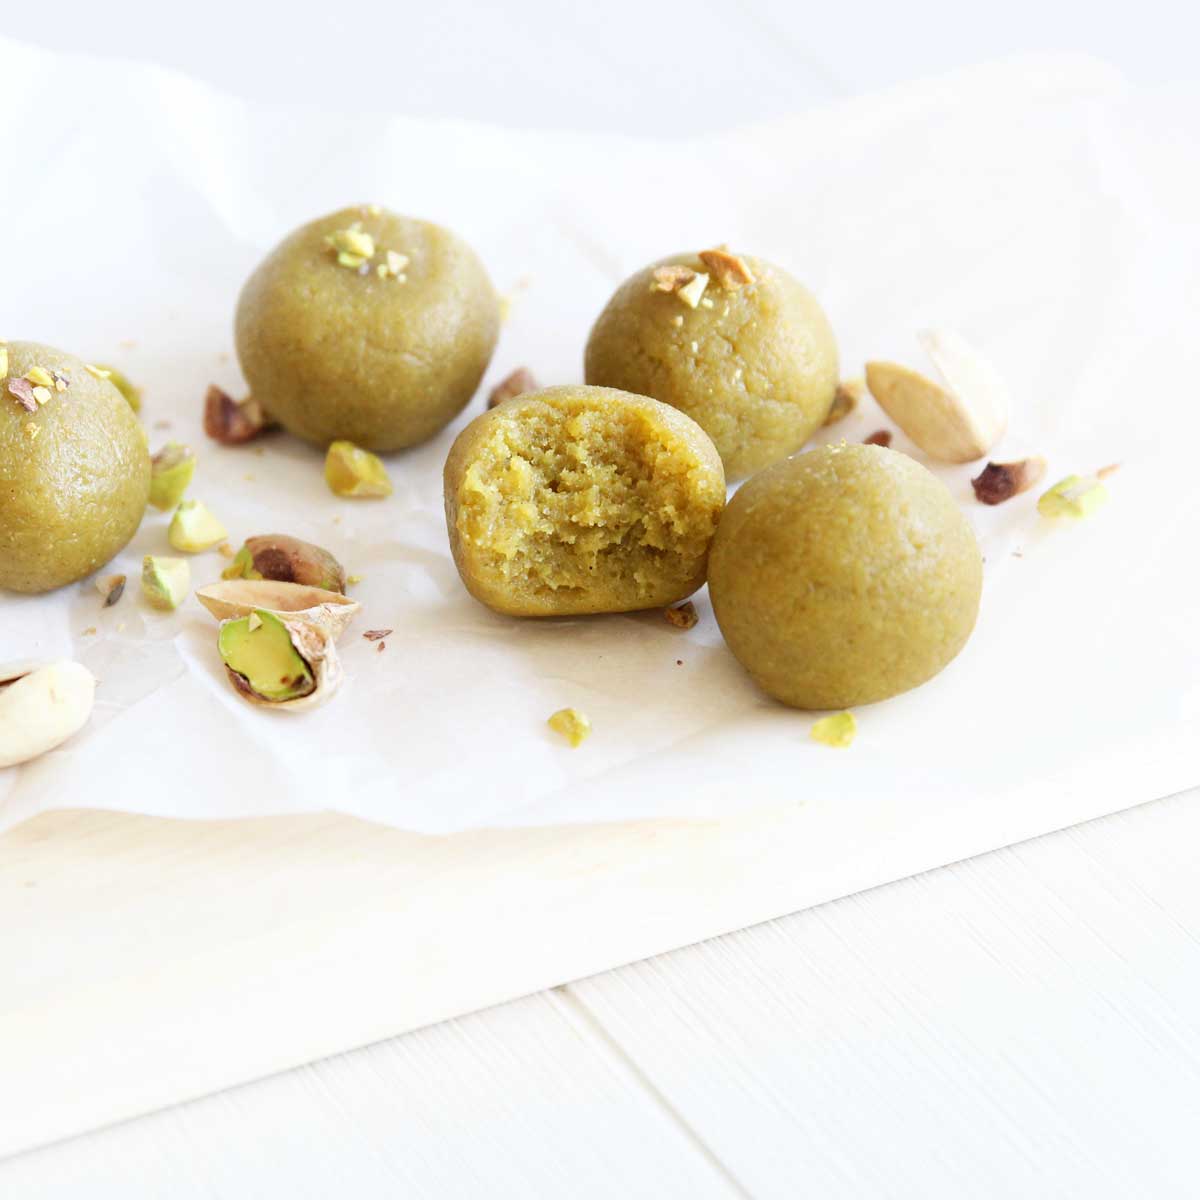 Keto Pistachio Cheesecake Protein Balls (Low Carb Energy Bites made with Collagen Peptides) - Almond Joy Protein Bars